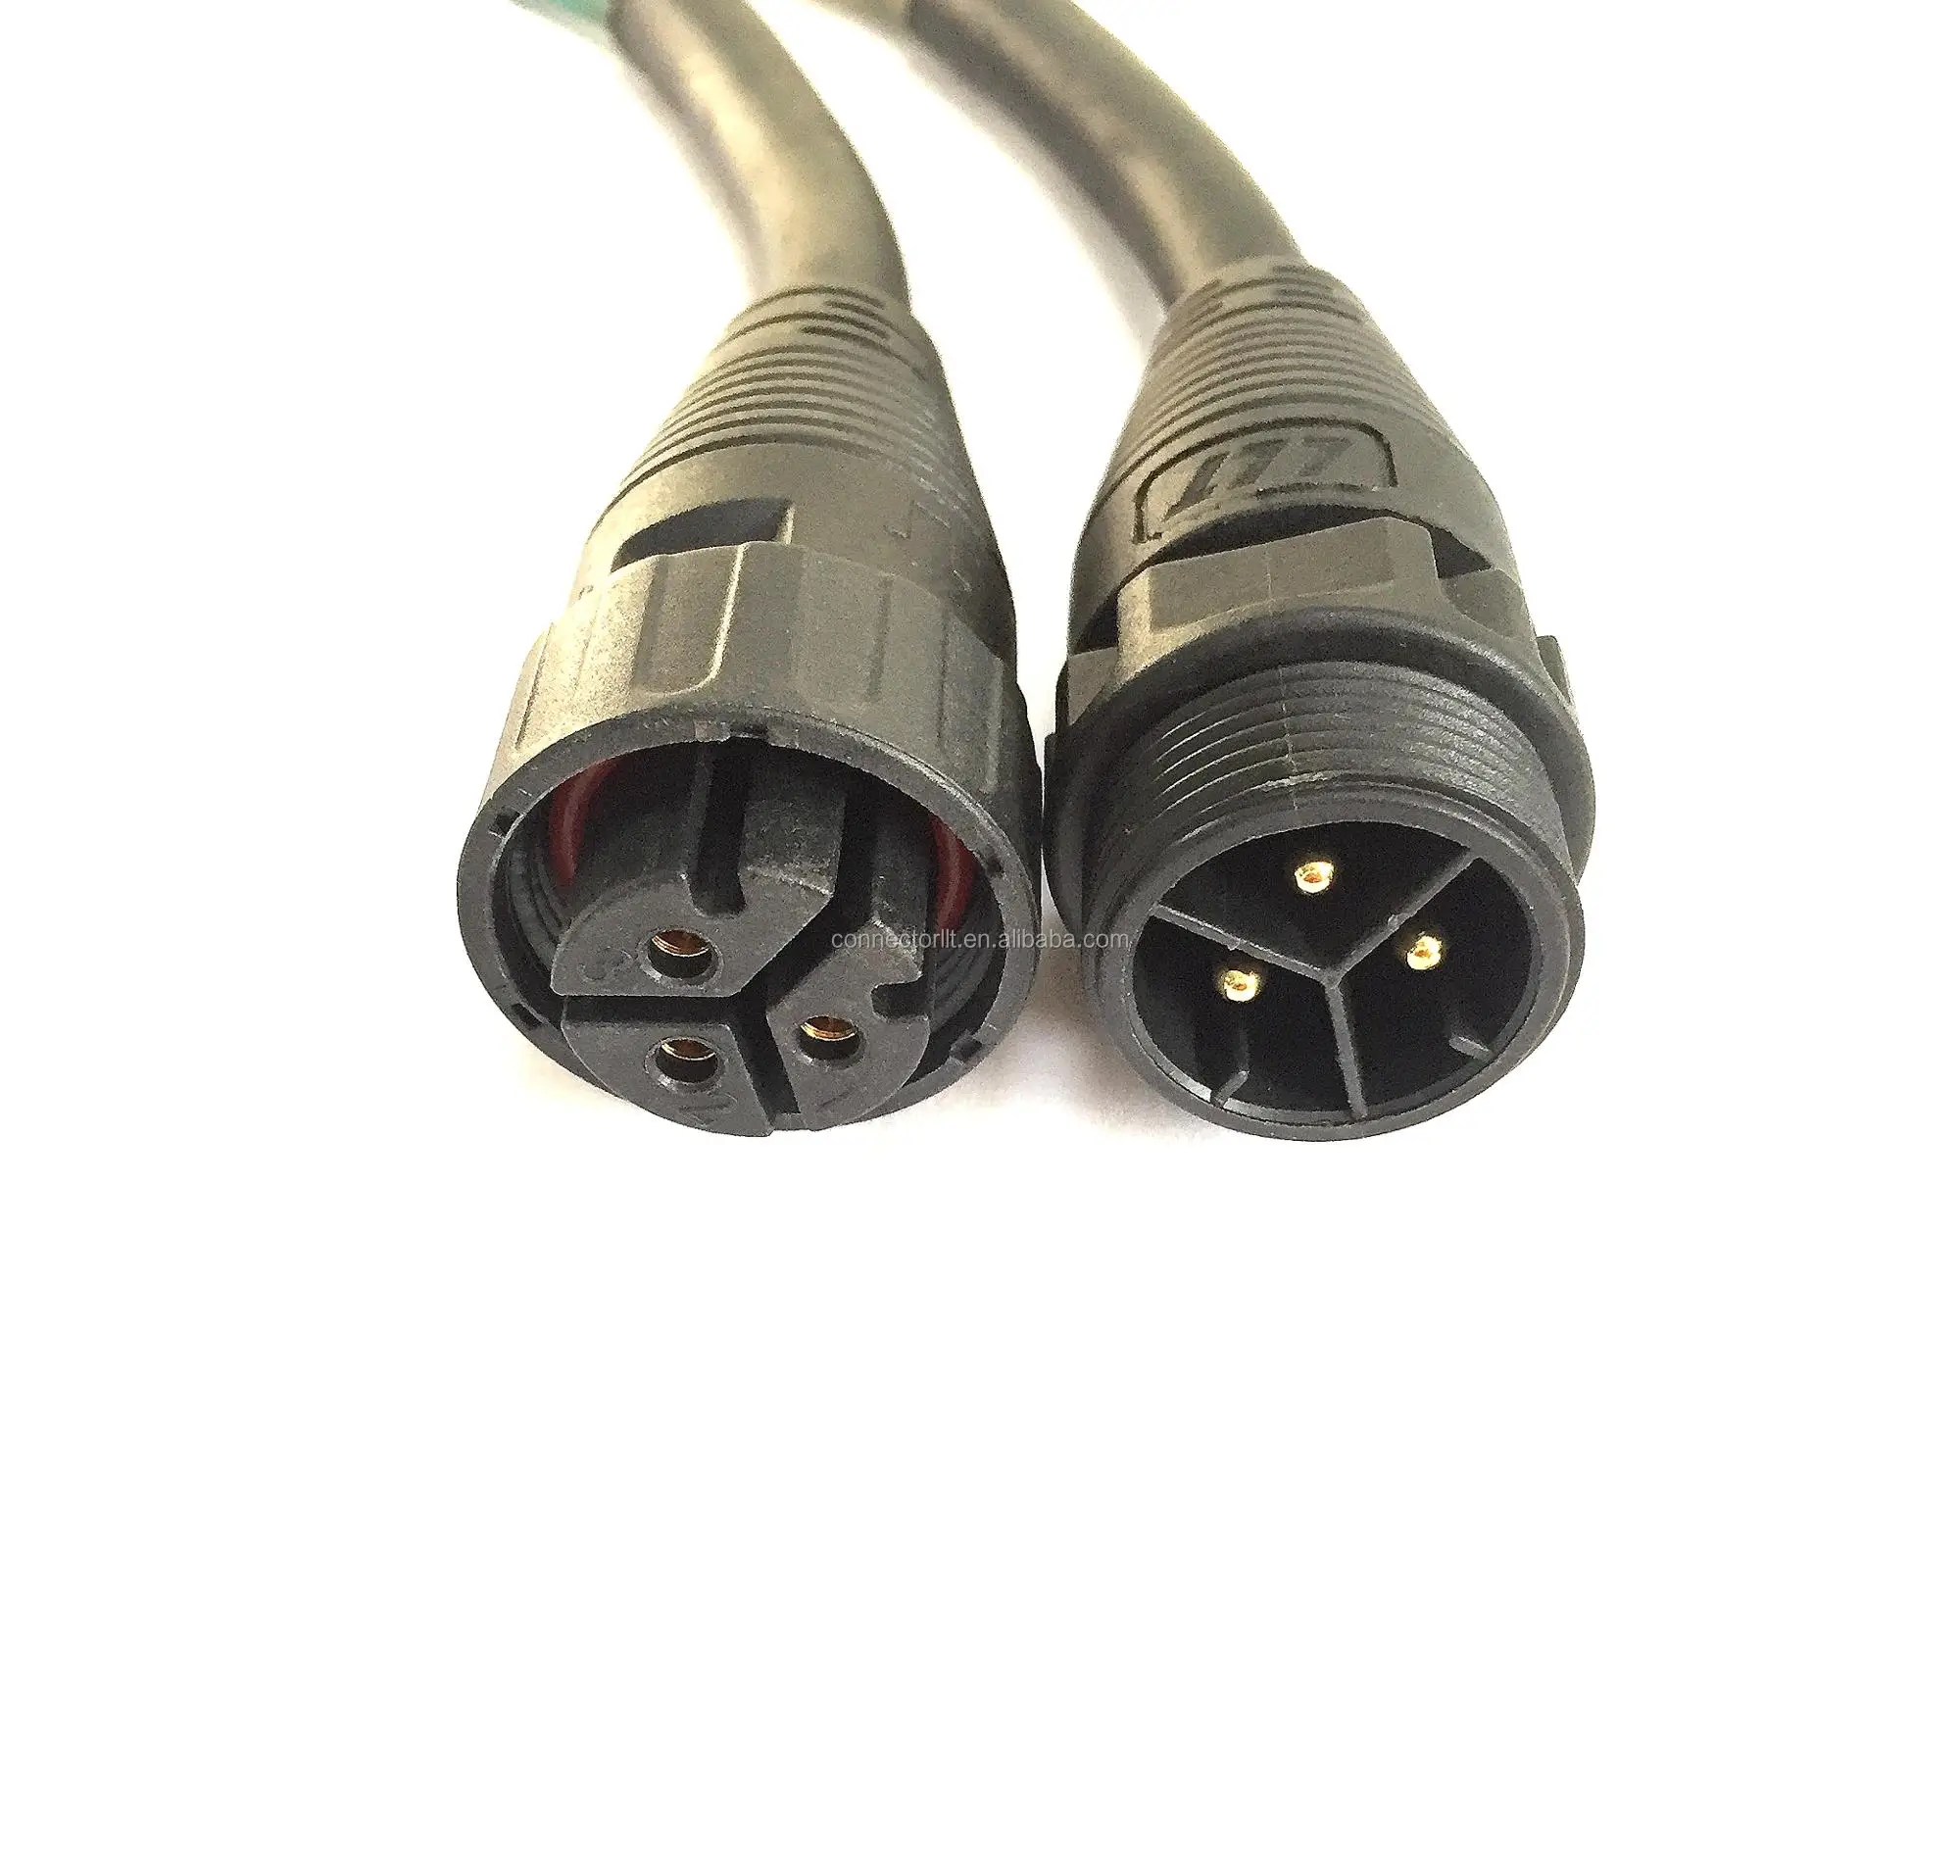 M25 3 Pin Threaded Wire To Wire Waterproof Connector - Buy Electrical ...